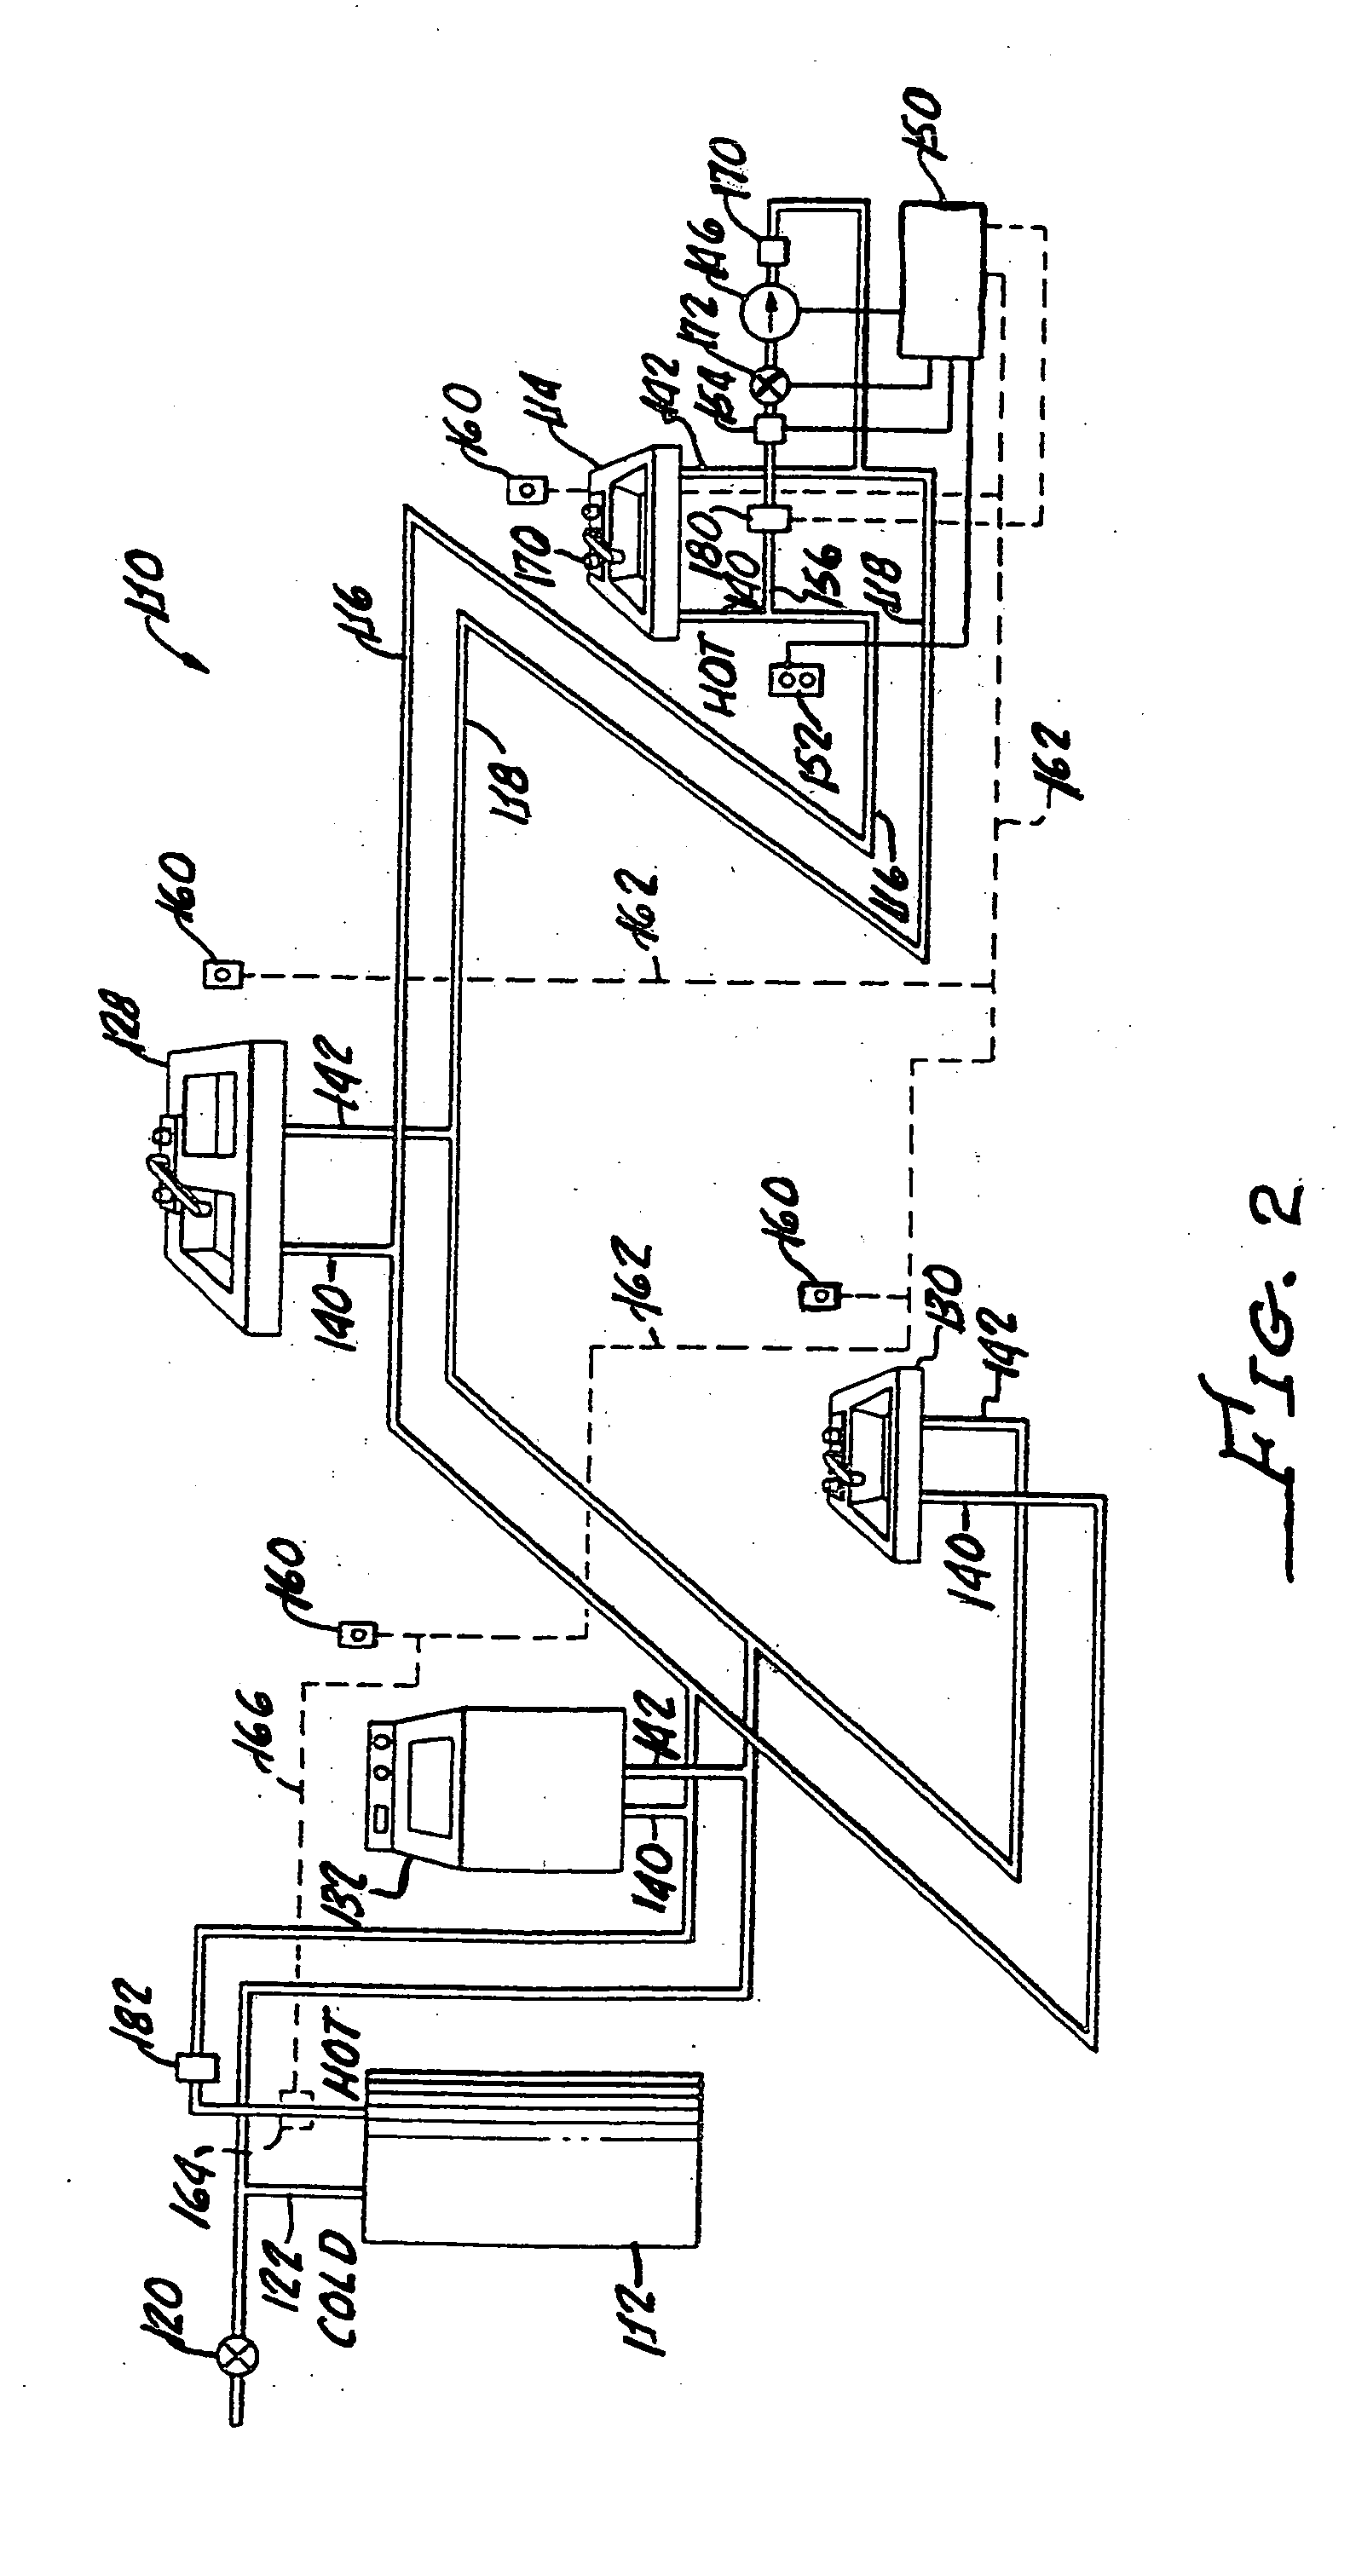 Method of operating a plumbing system